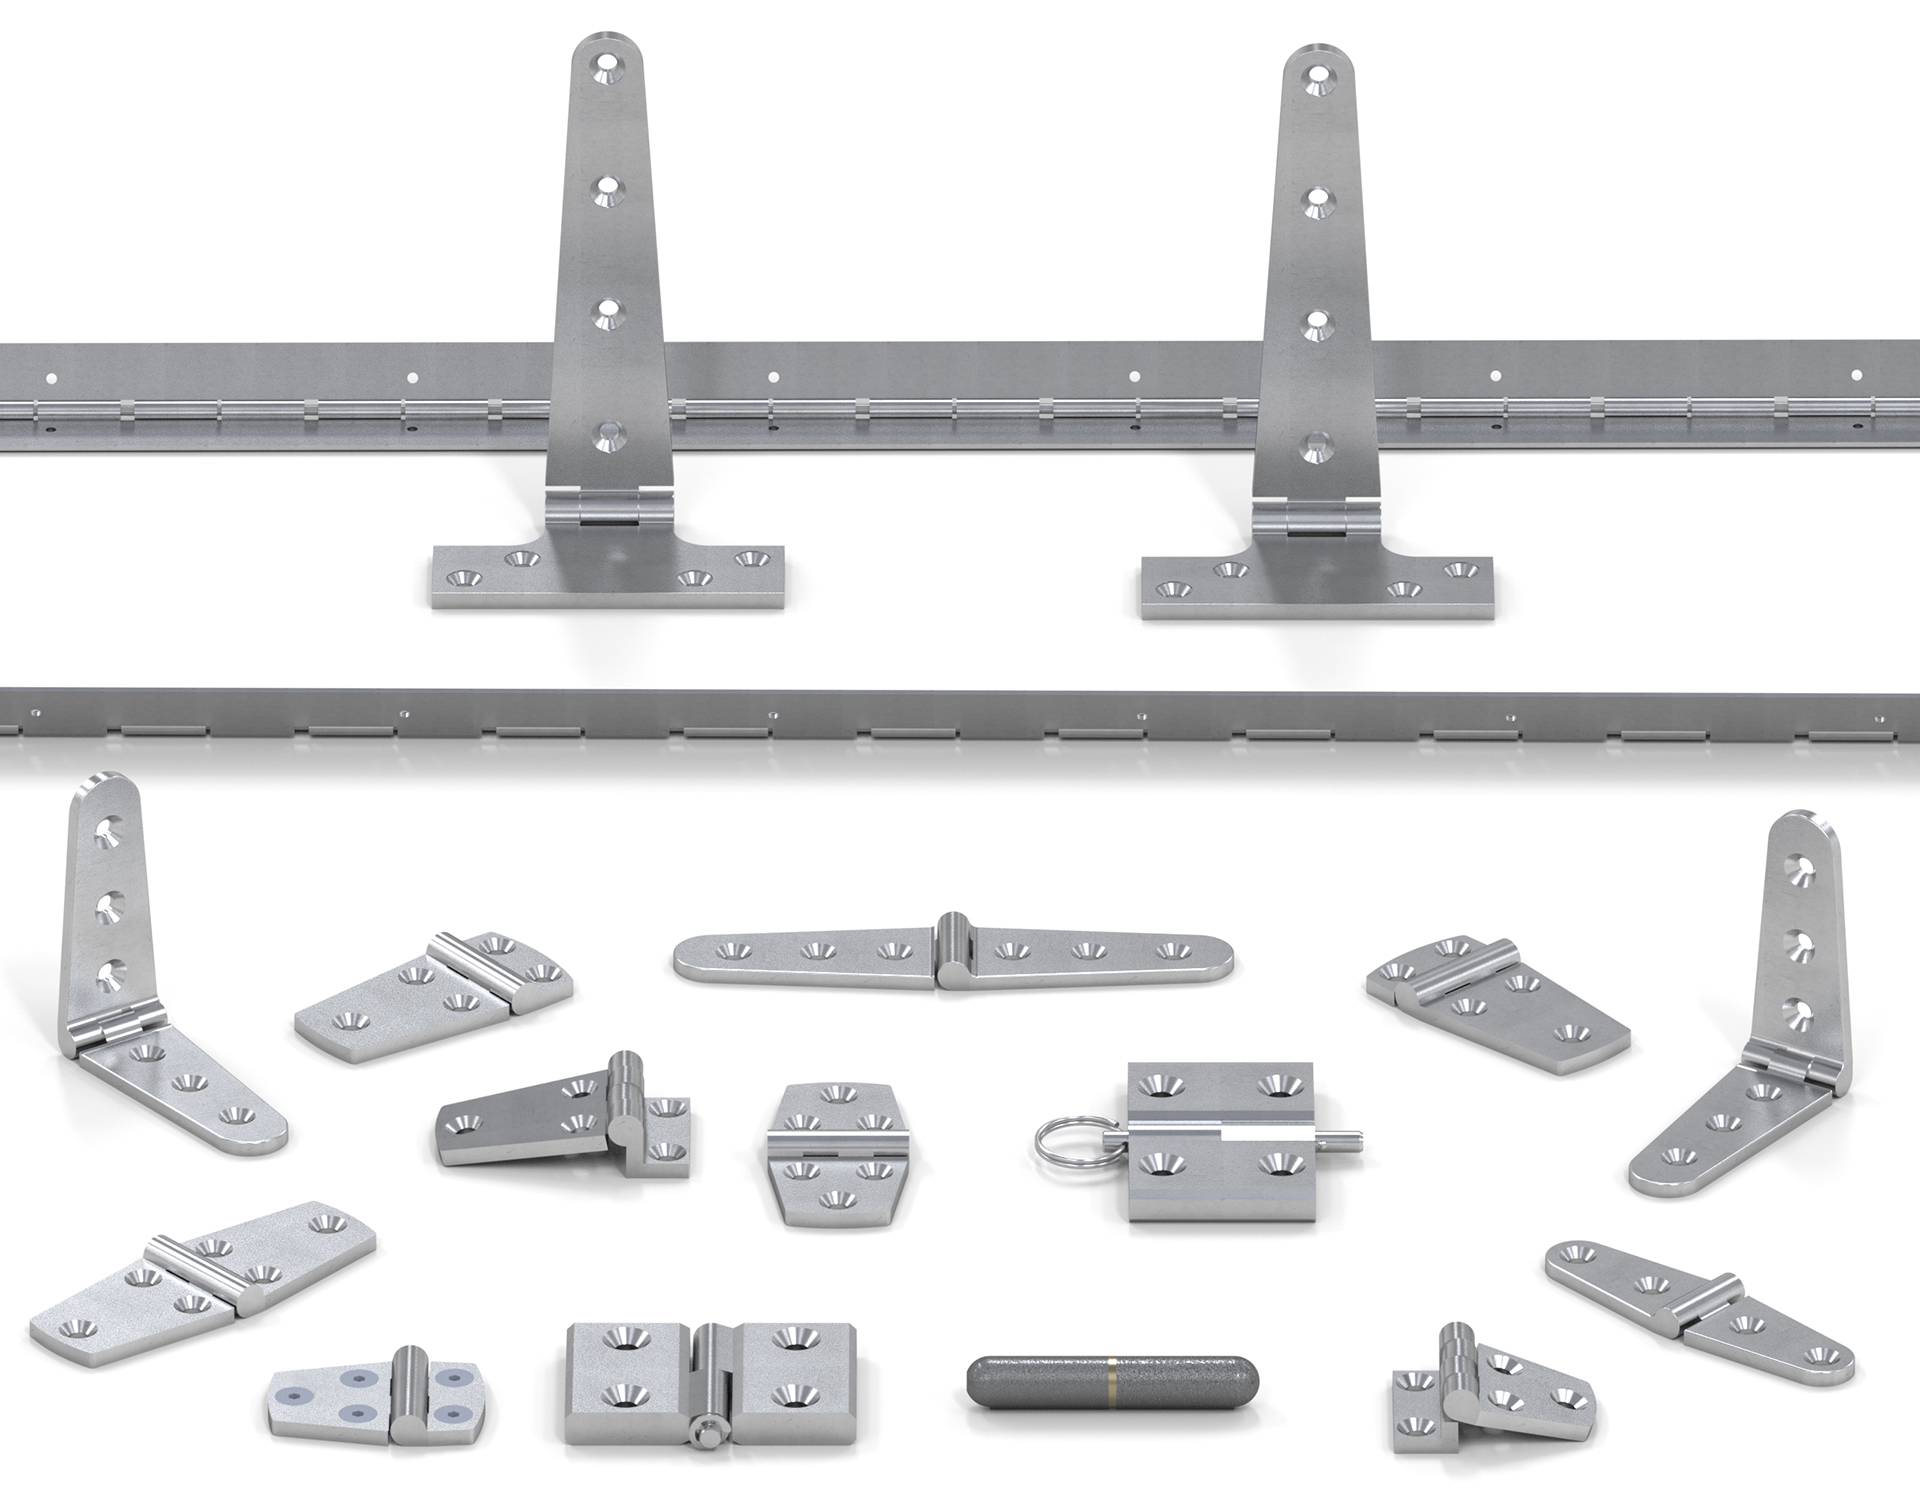 WDS Components has expanded its range of hinges including new designs. Manufactured in stainless steel, the hinges are heavy duty and corrosion-free.